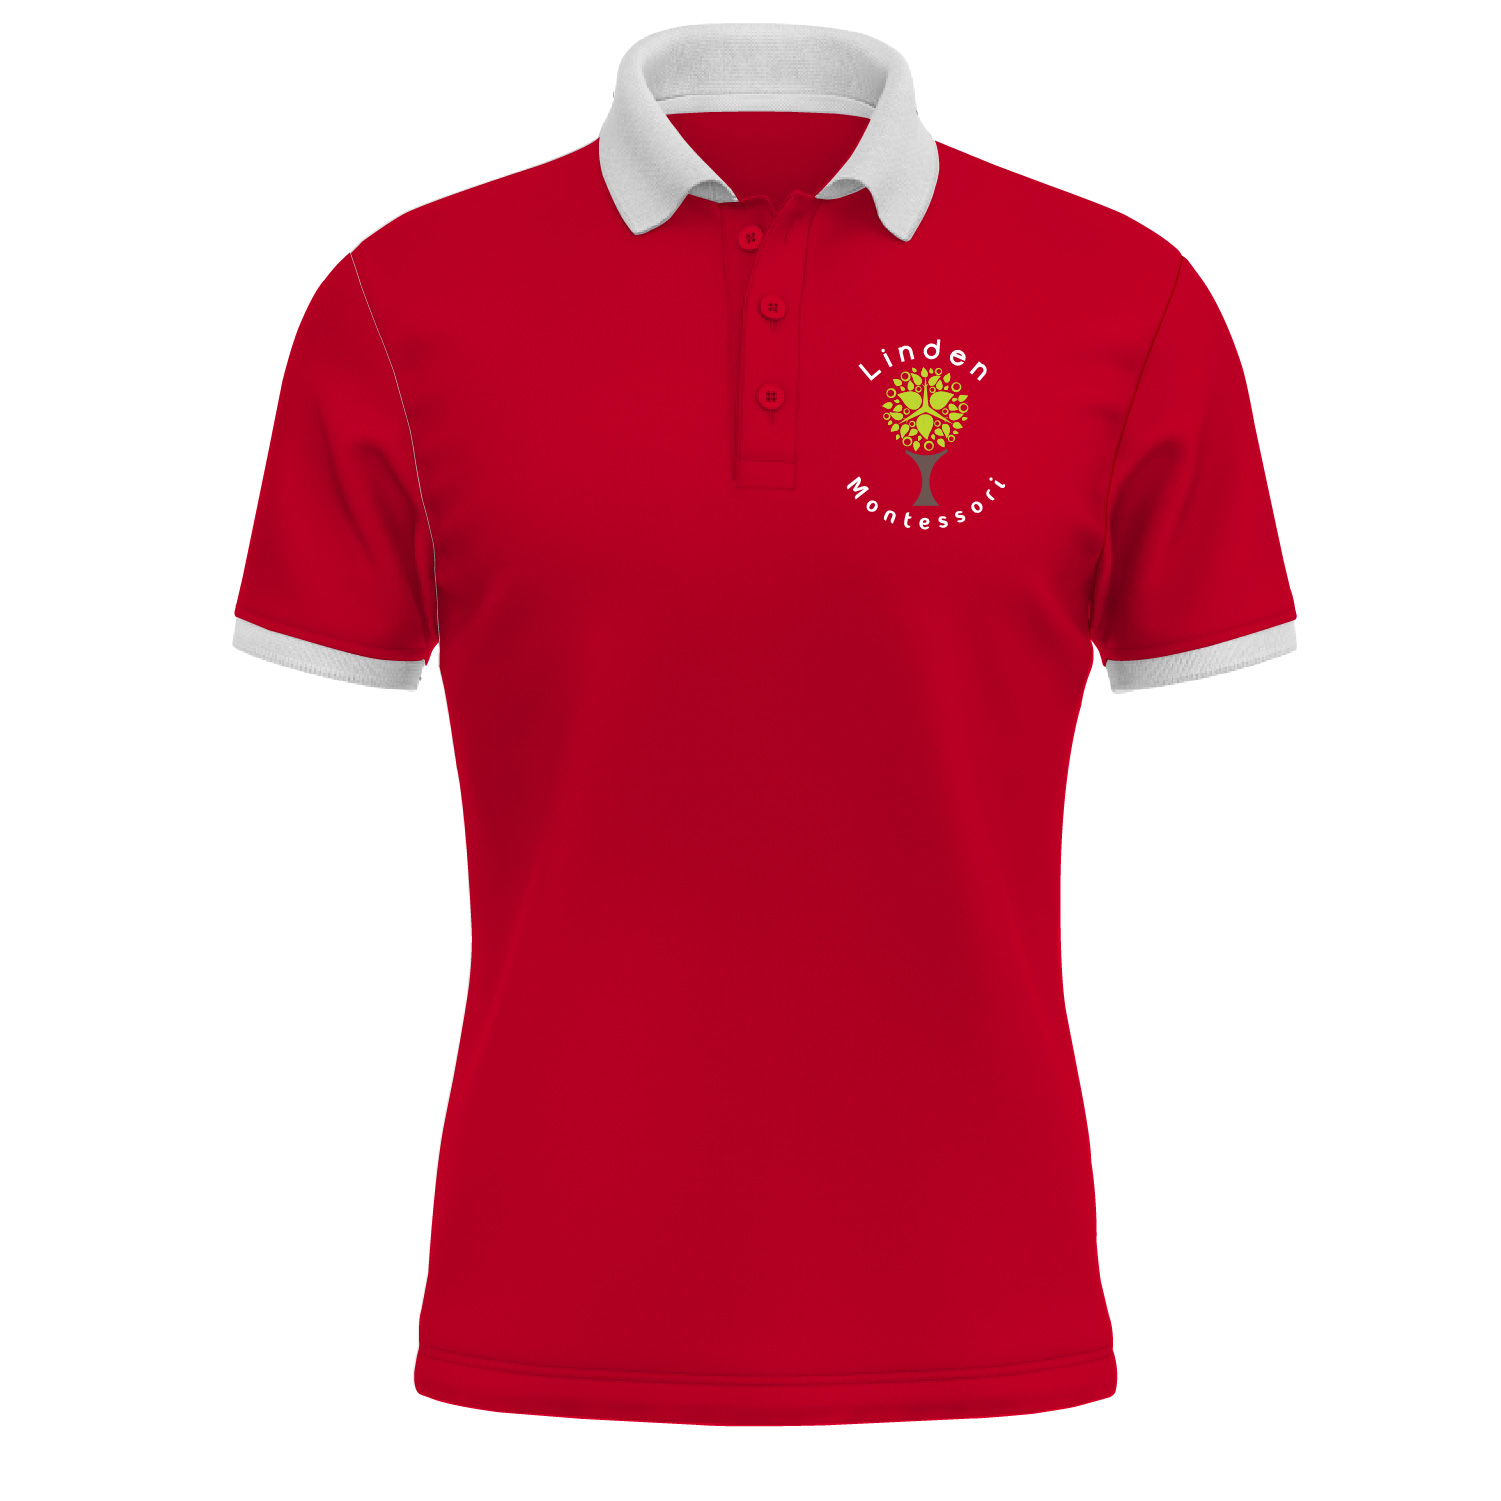 PQ Polo T-Shirt in Red (Linden Montessori) - T10 Sports